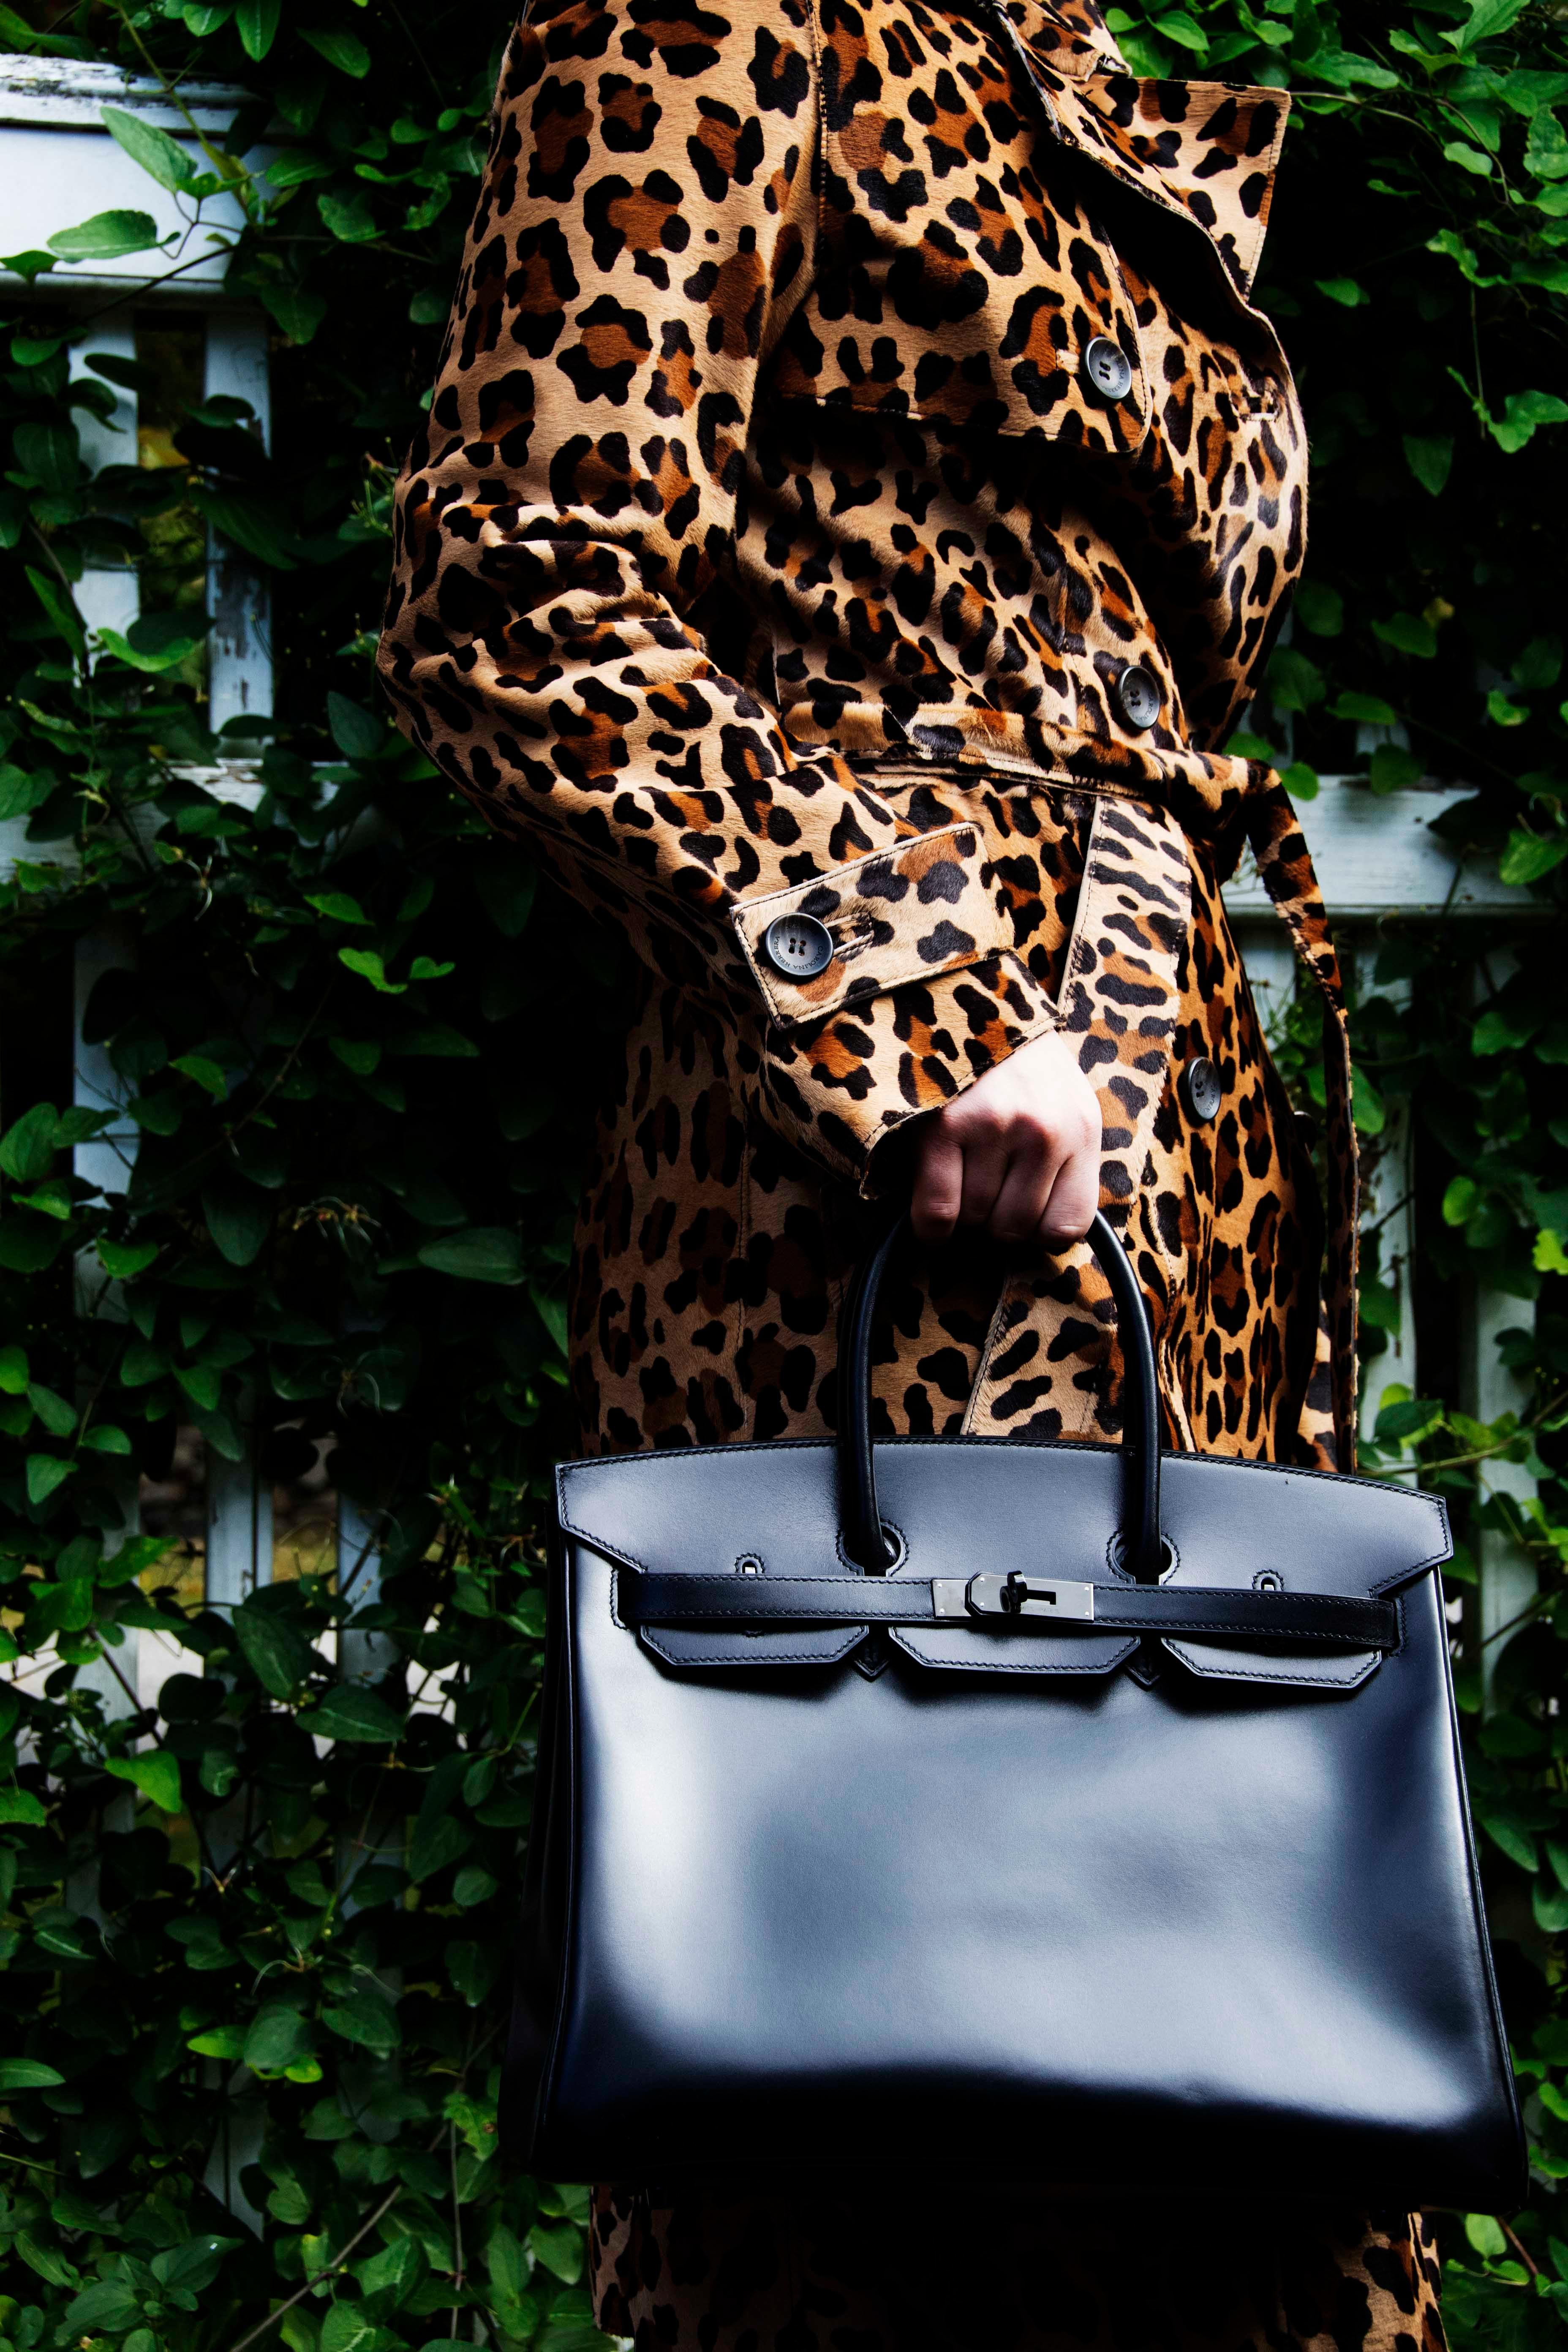 Extremely coveted brand new Collector's edition from 2011, So Black box calf Hermes 35cm Birkin with black Hardware. Every feature of this bag from the leather down to the hardware and keys is all black. It comes complete with black Hermes box,